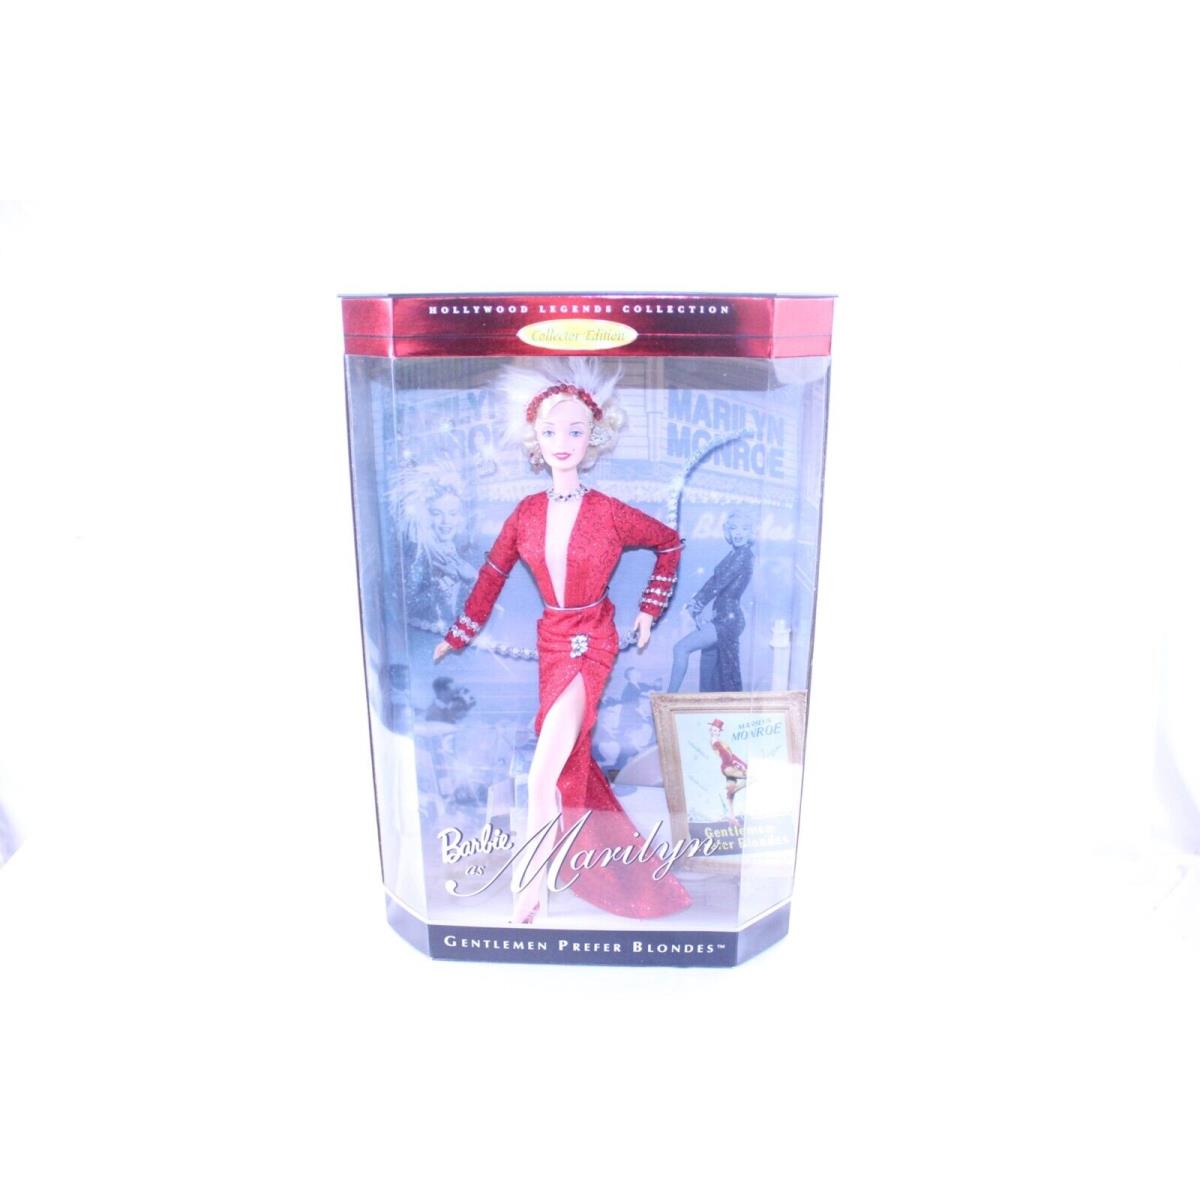 Mattel Collectible Barbie as Marilyn Hollywood Legends Series Red Dress 17452